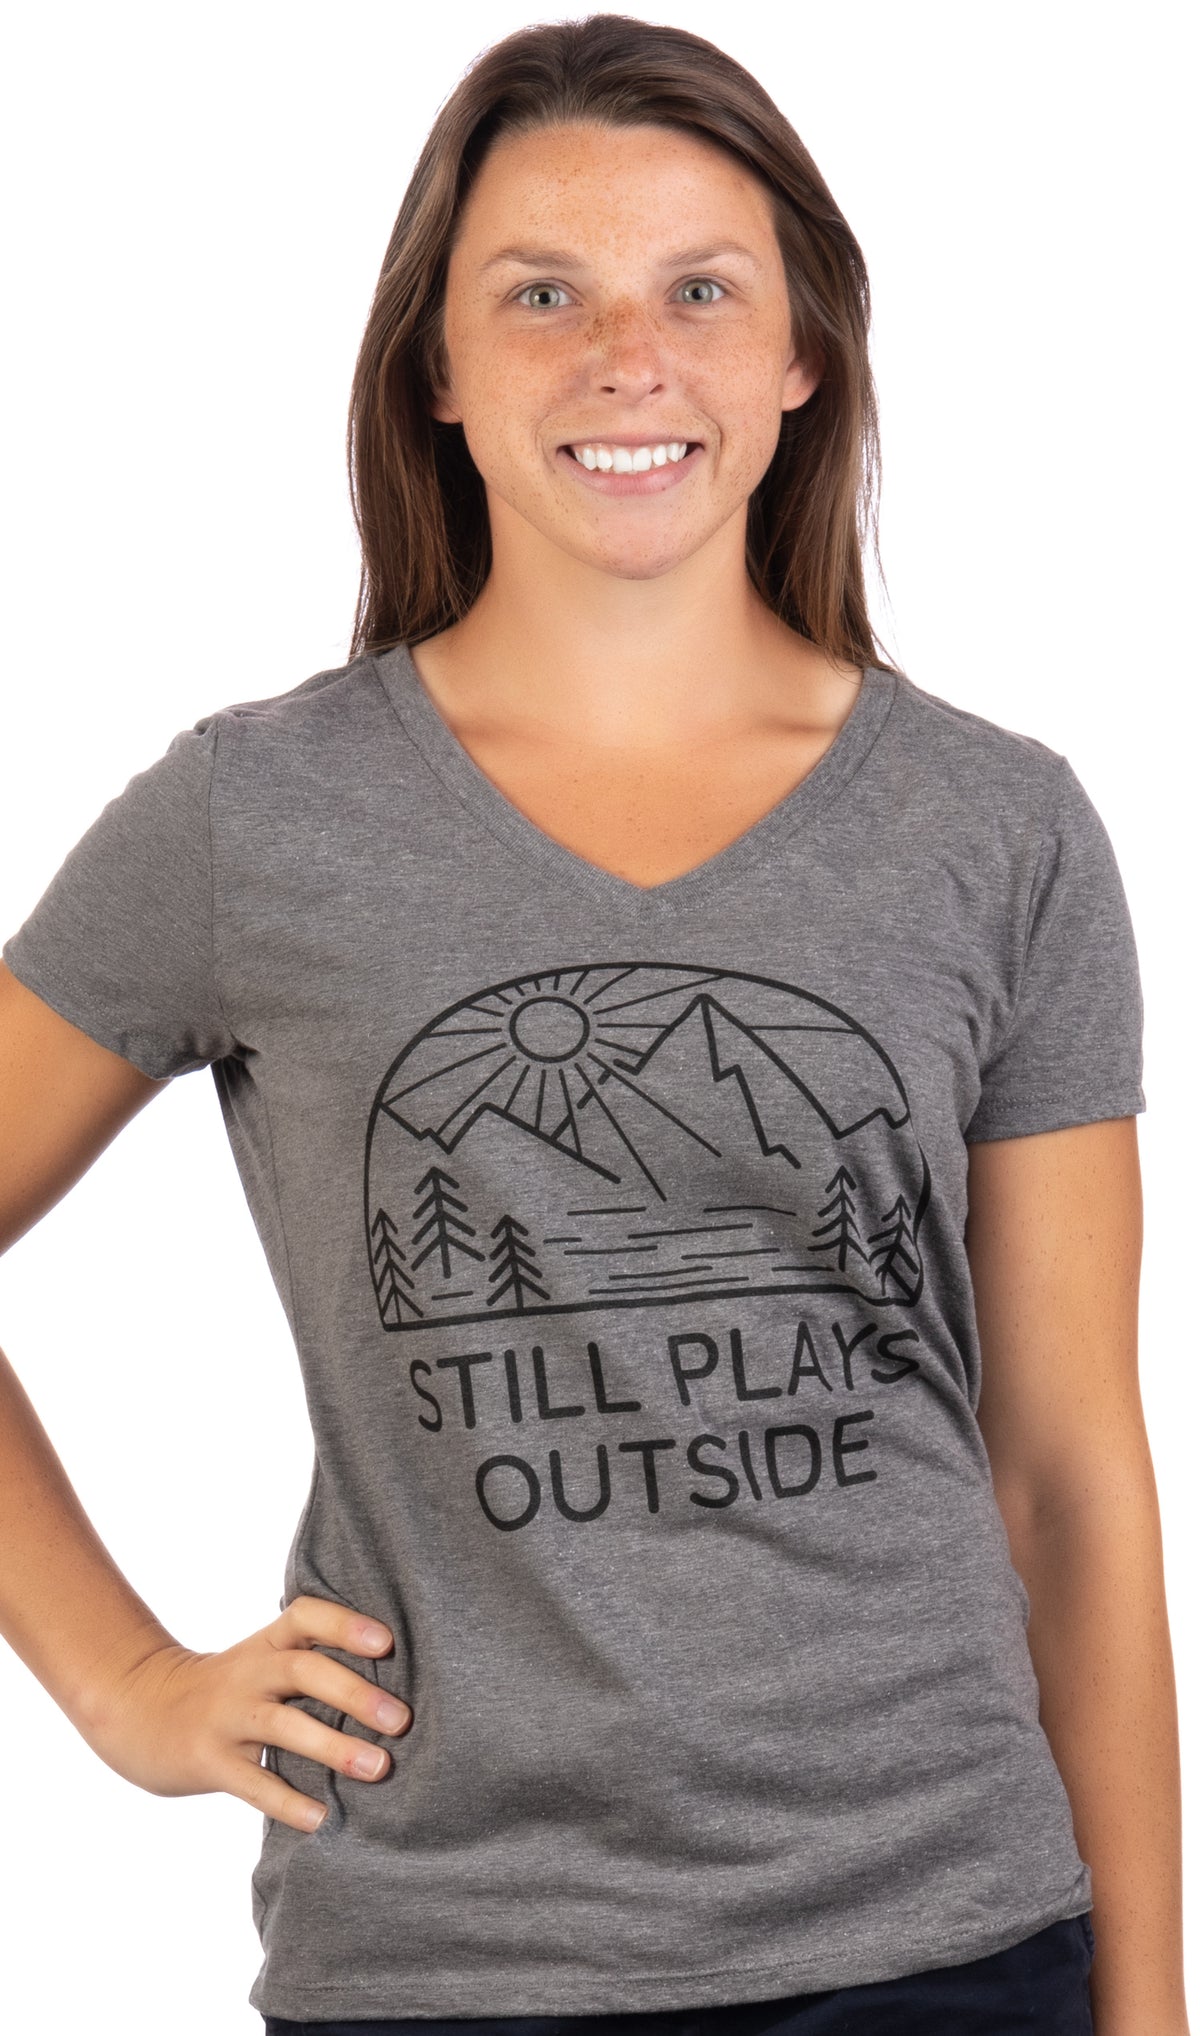 Still Plays Outside - Funny Hiking Hiker Camping Camper Outdoors Women's Shirt